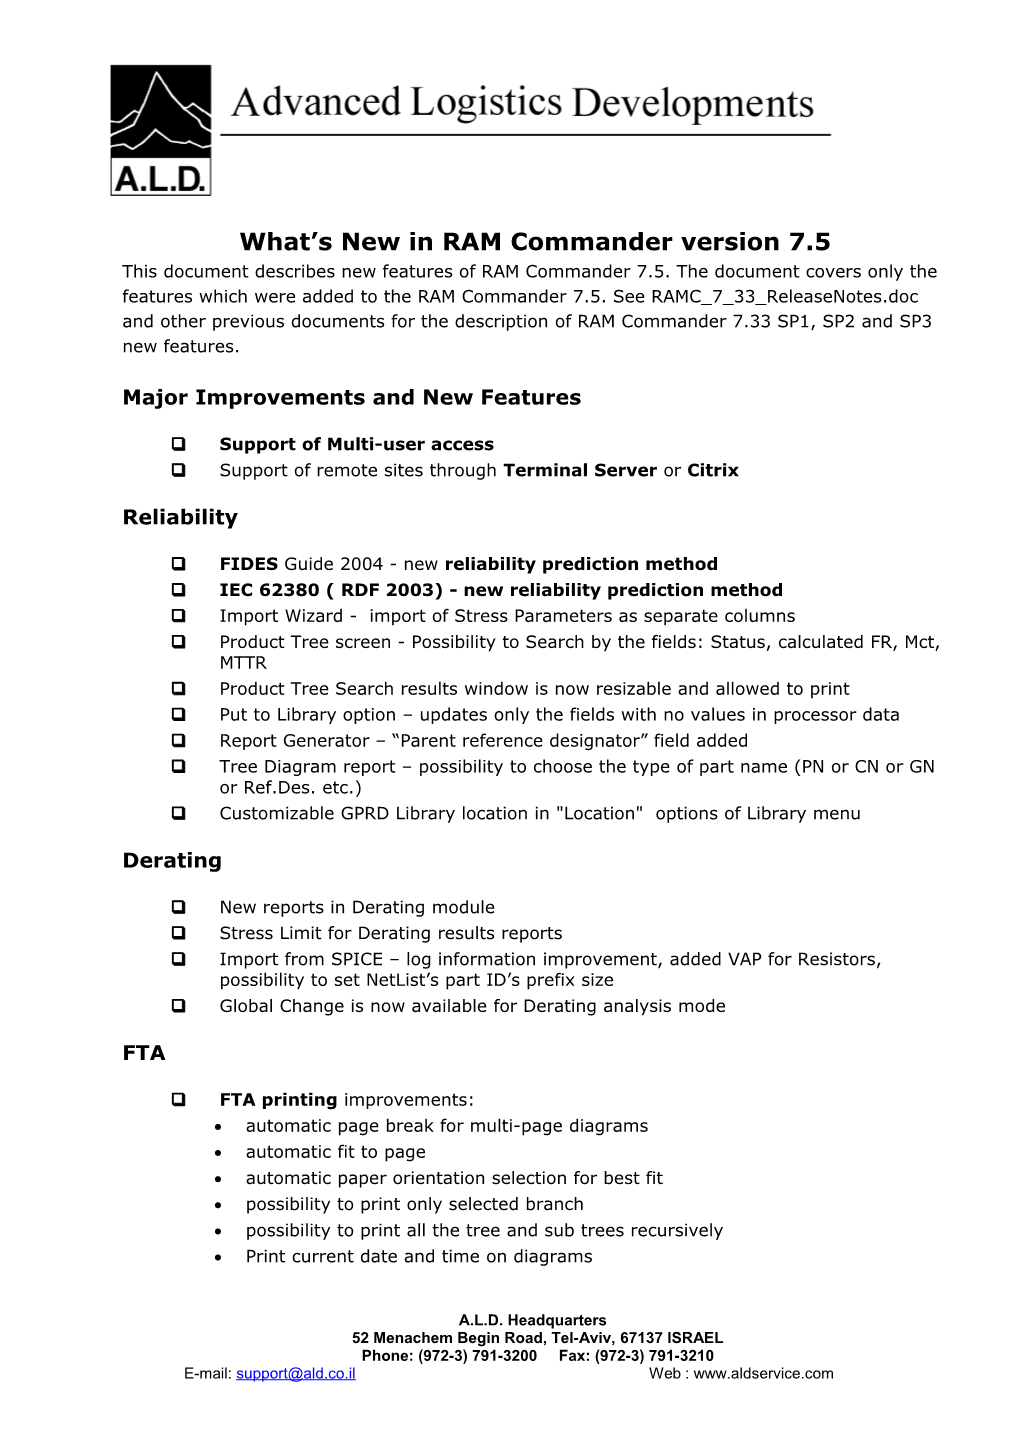 What's New in RAM Commander Version 7